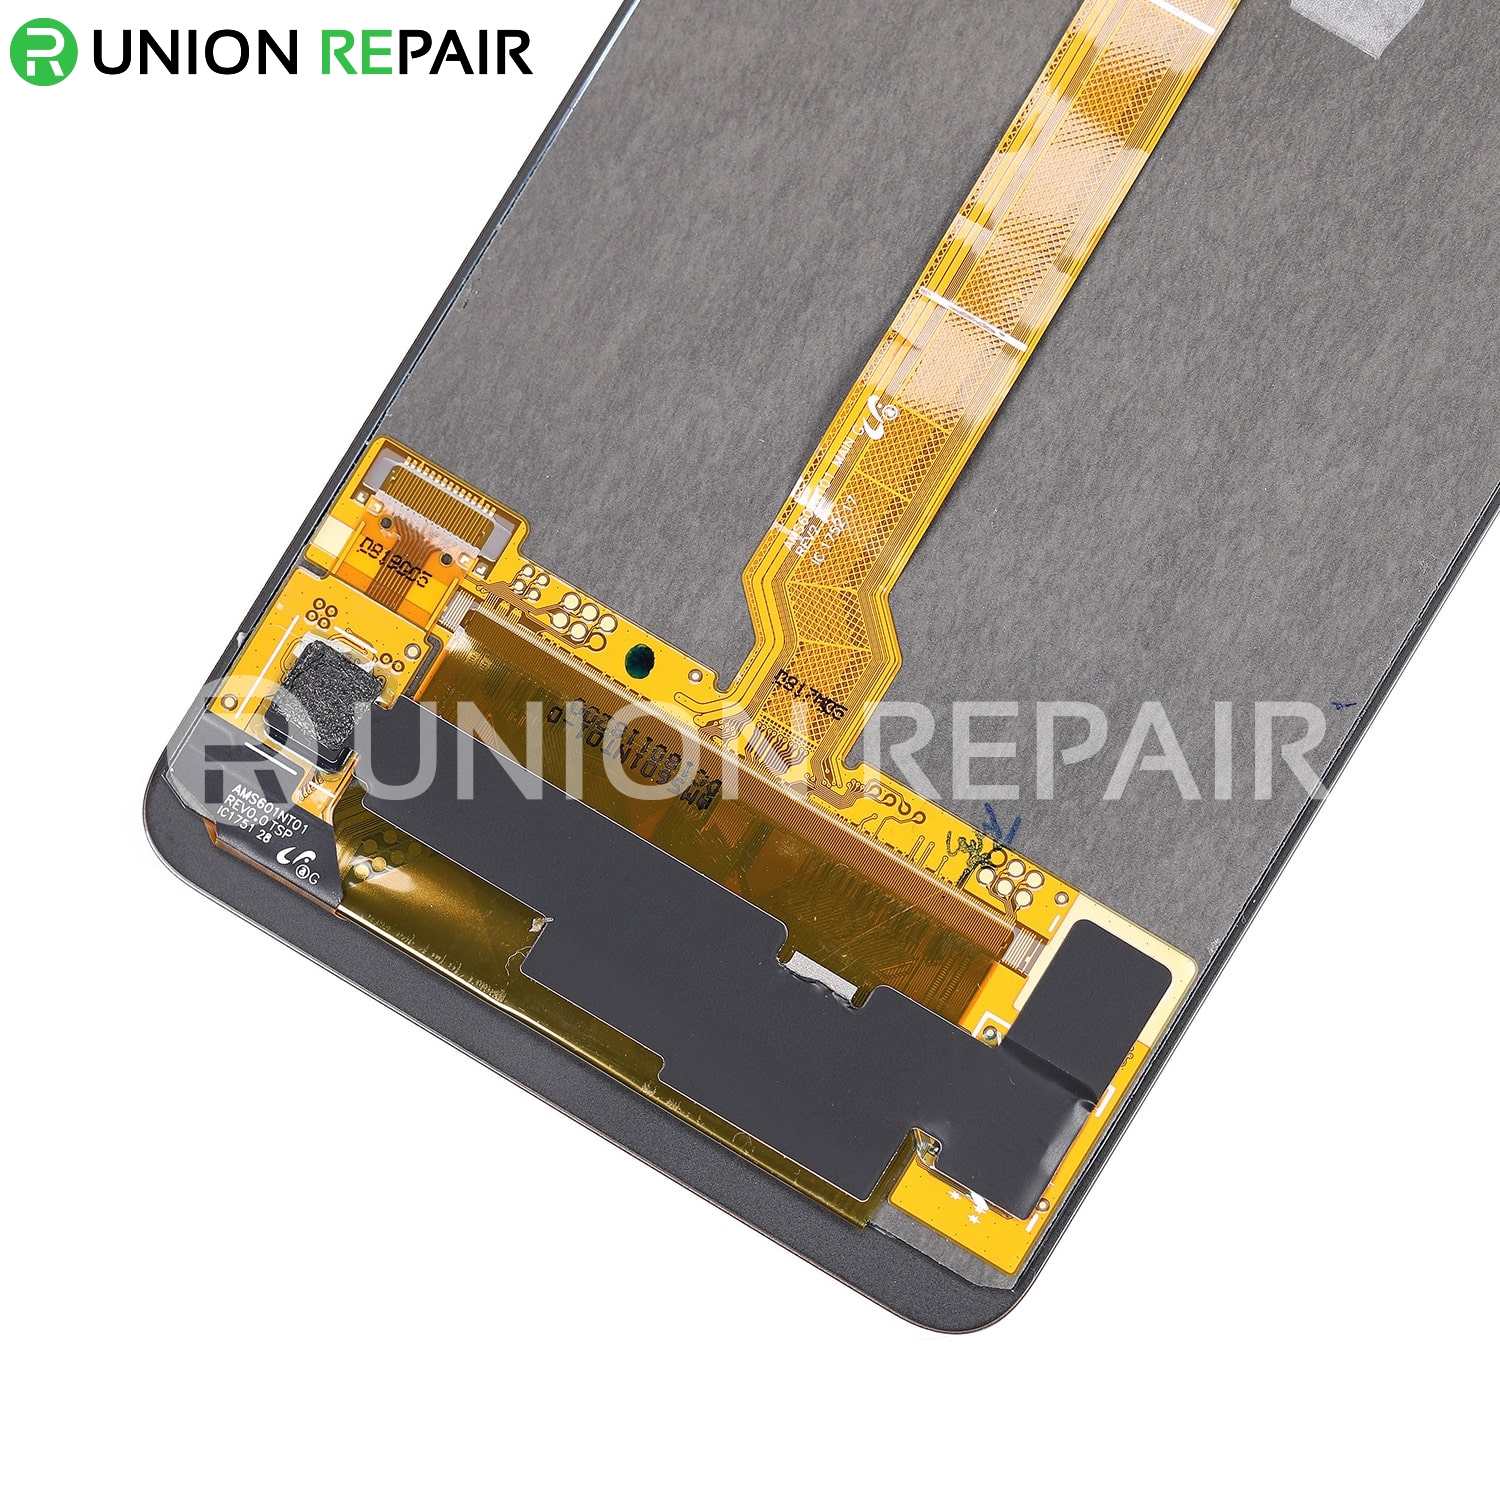 Replacement for Huawei Mate 10 Pro LCD Screen Digitizer Assembly - Mocha Brown